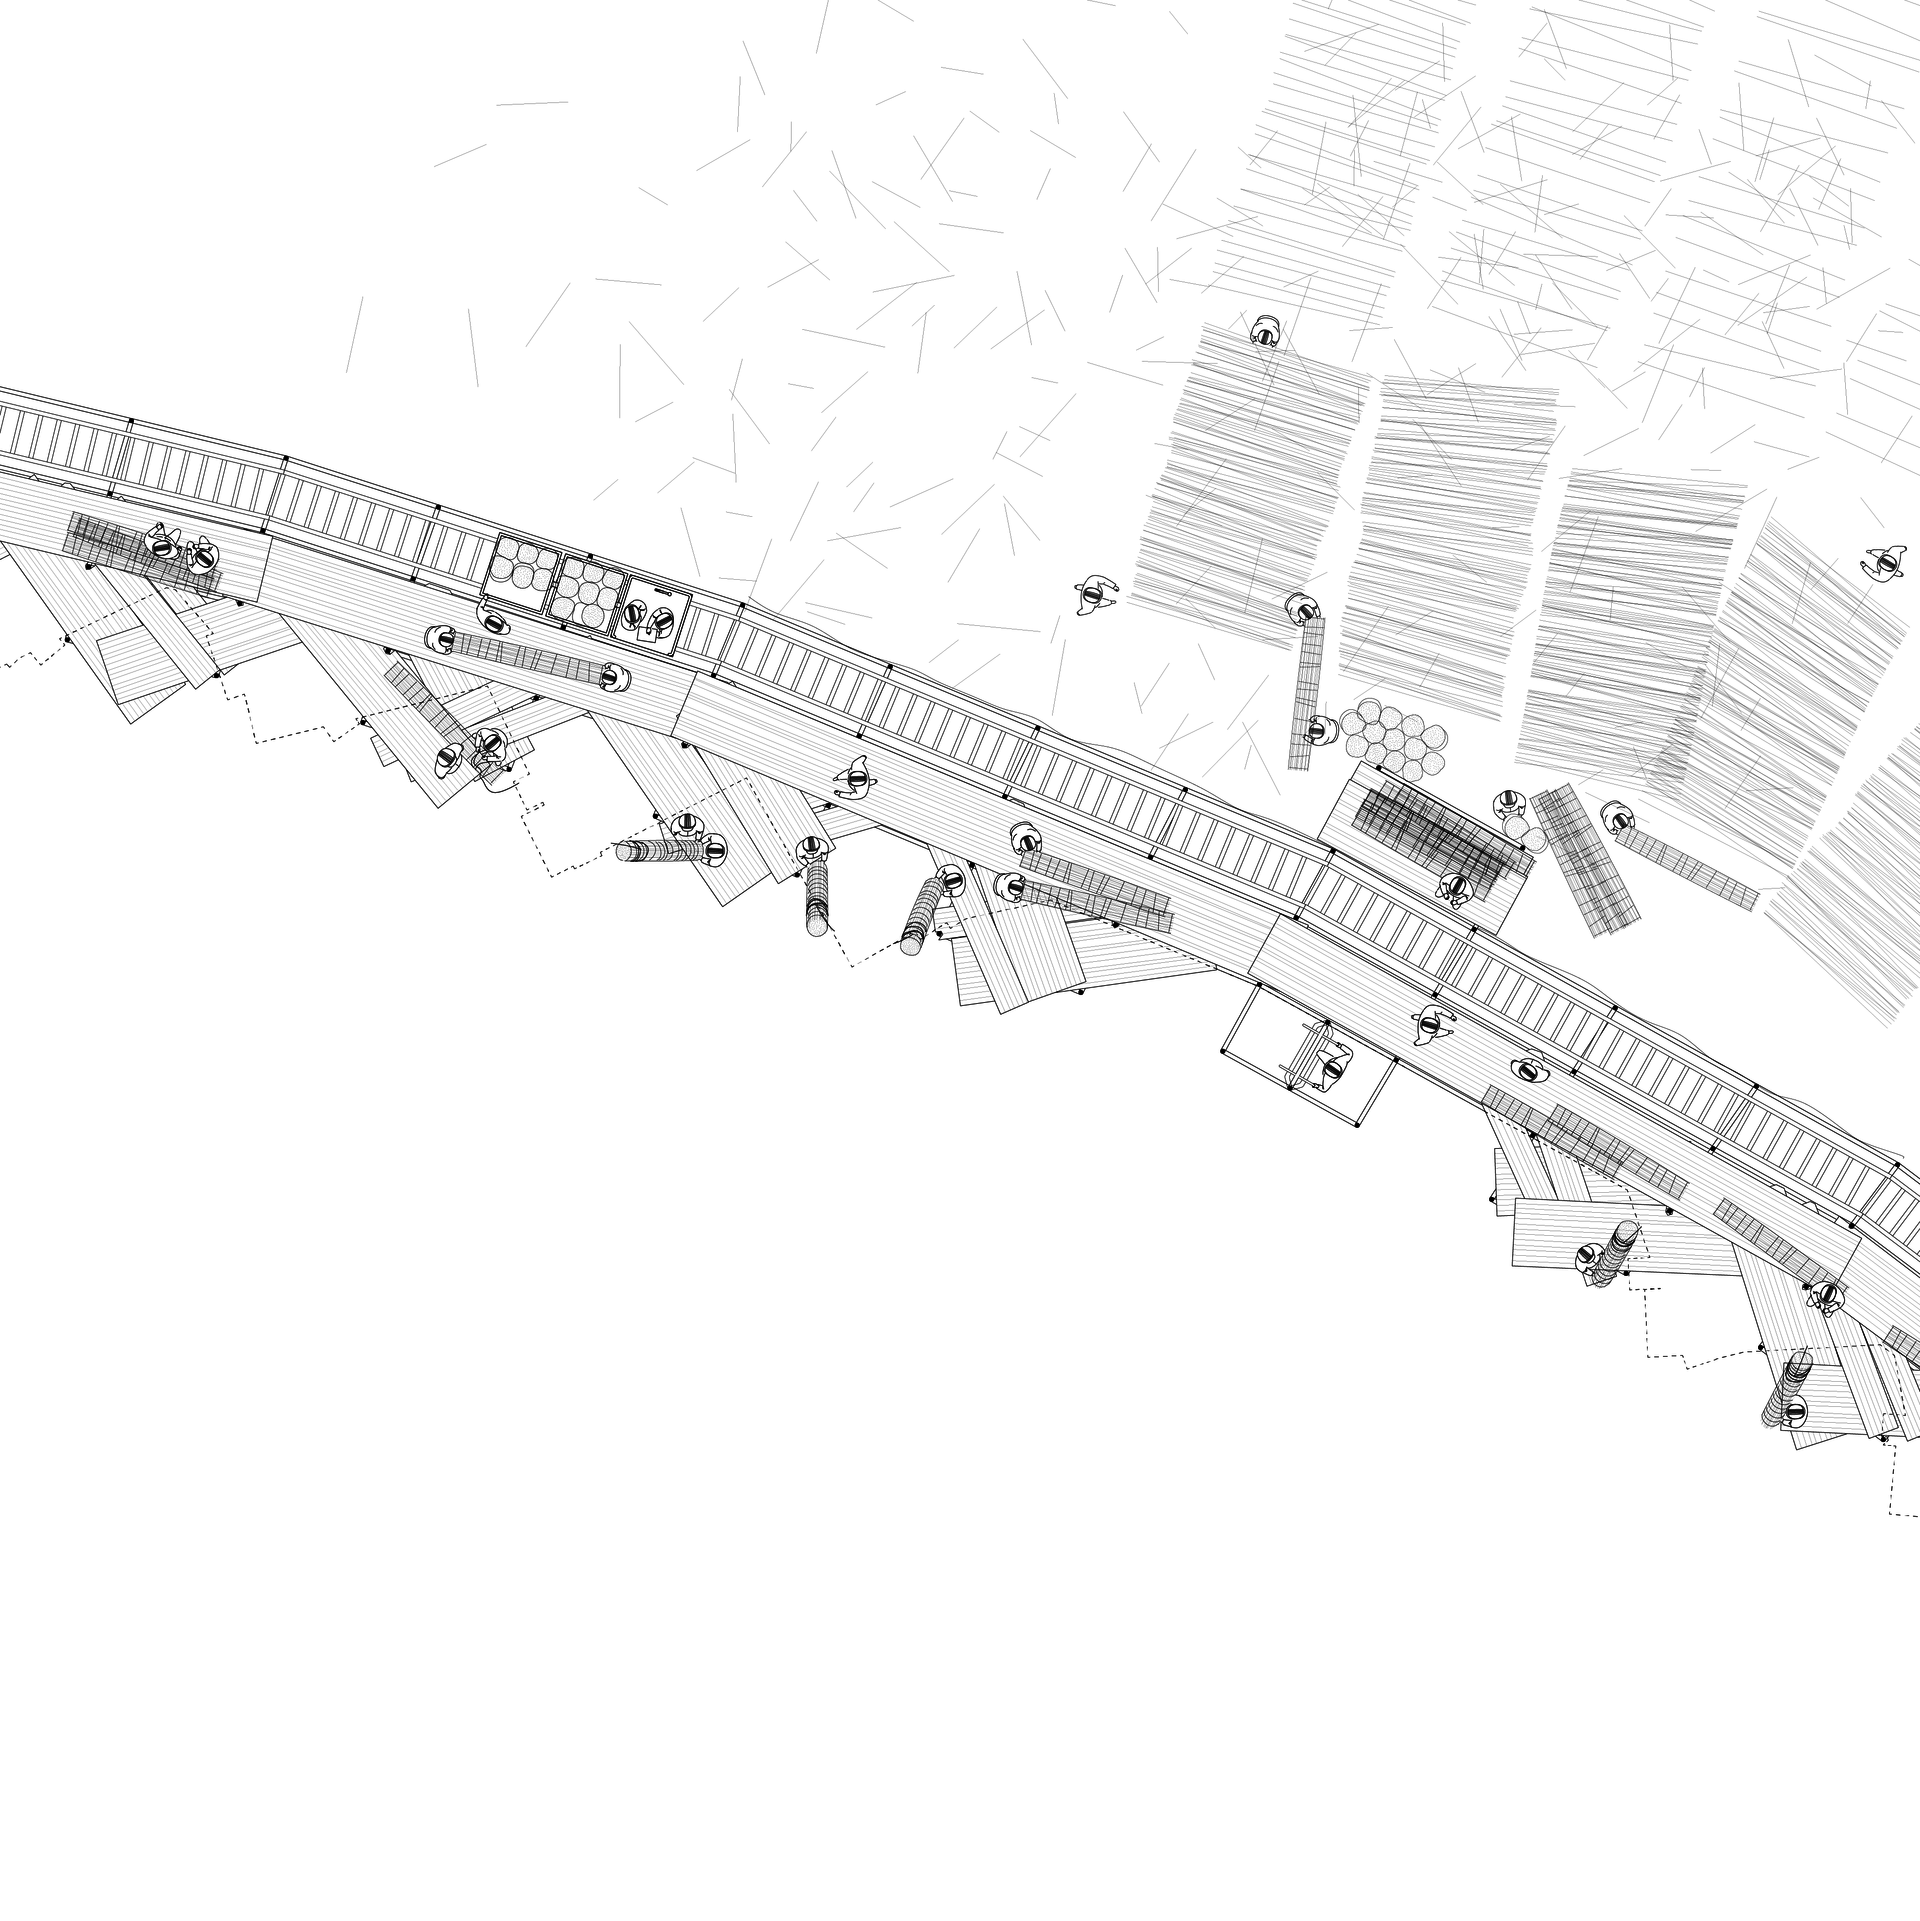 A fictional scaffold plan drawing and visual speculations on the construction activities.